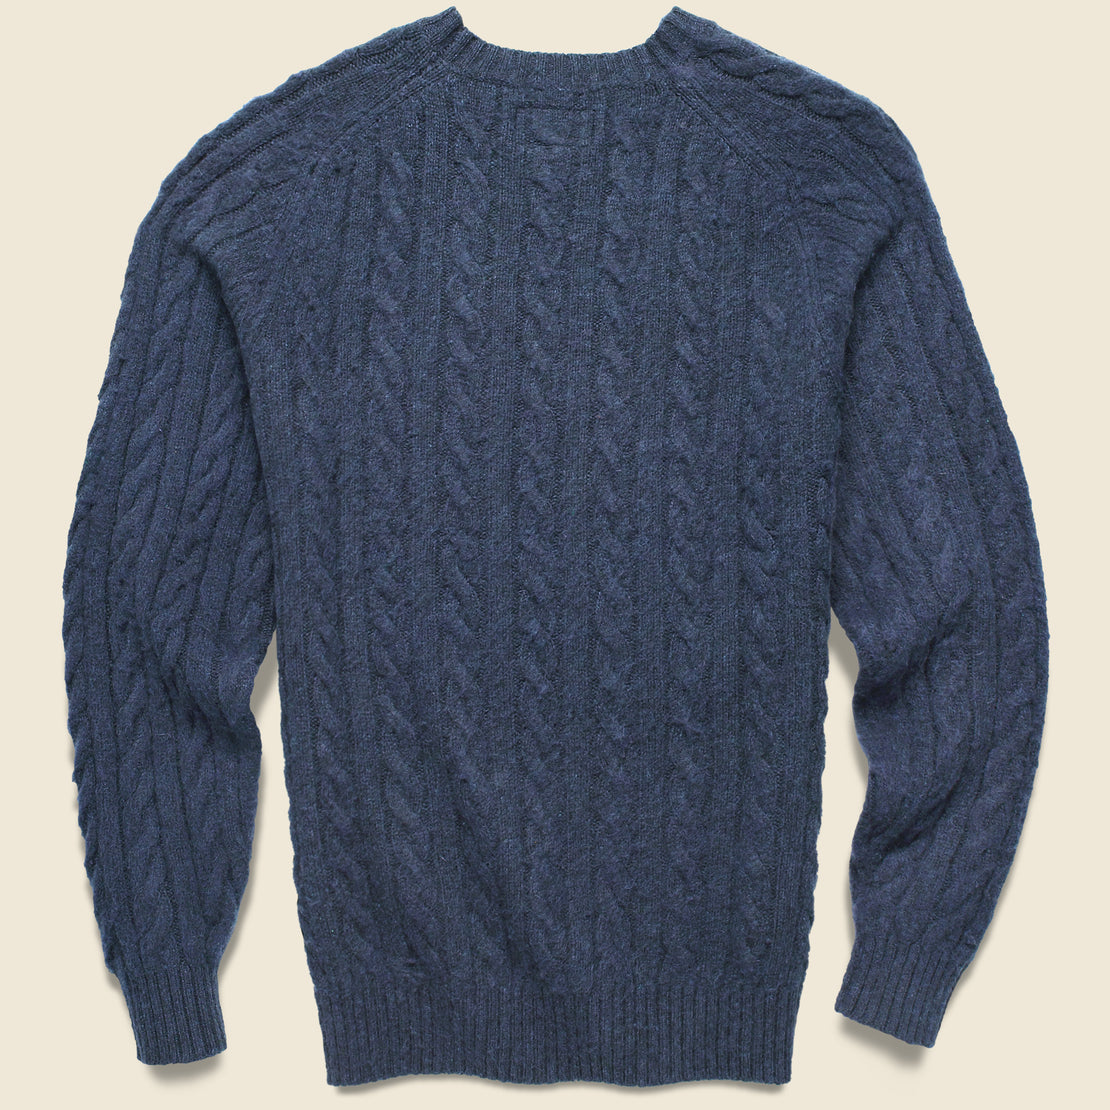 Shaggy Cable Crew Sweater - Indigo - BEAMS+ - STAG Provisions - Tops - Sweater